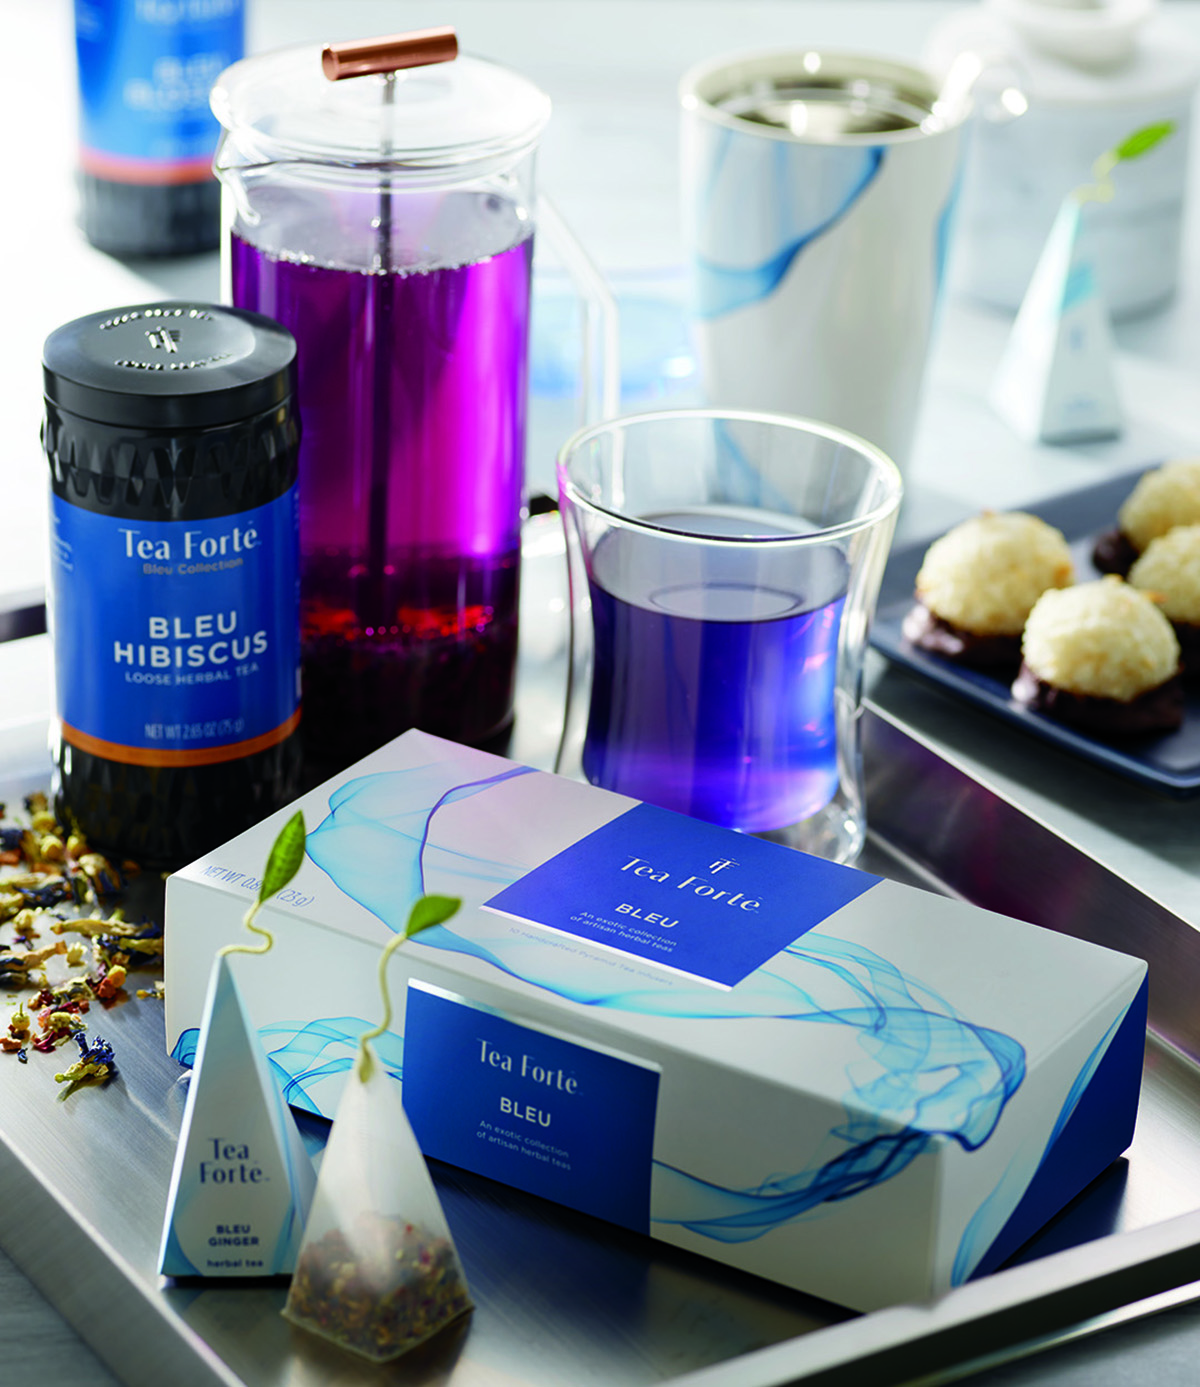 Tea Forte's new bleu collection will be for sale at its forthcoming Boston shop